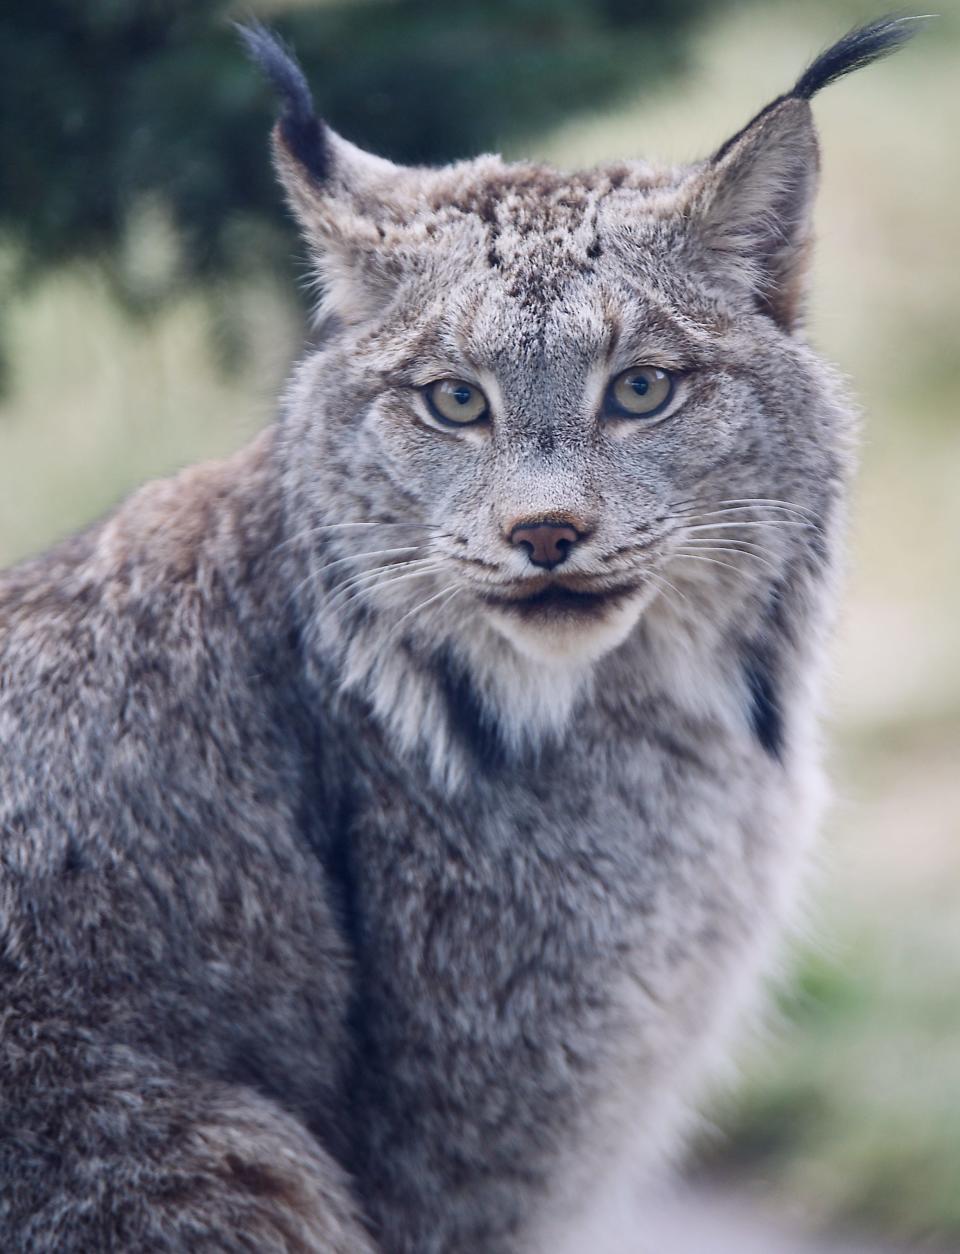 Hunter, a lynx at the Erie Zoo, sits in his enclosure.